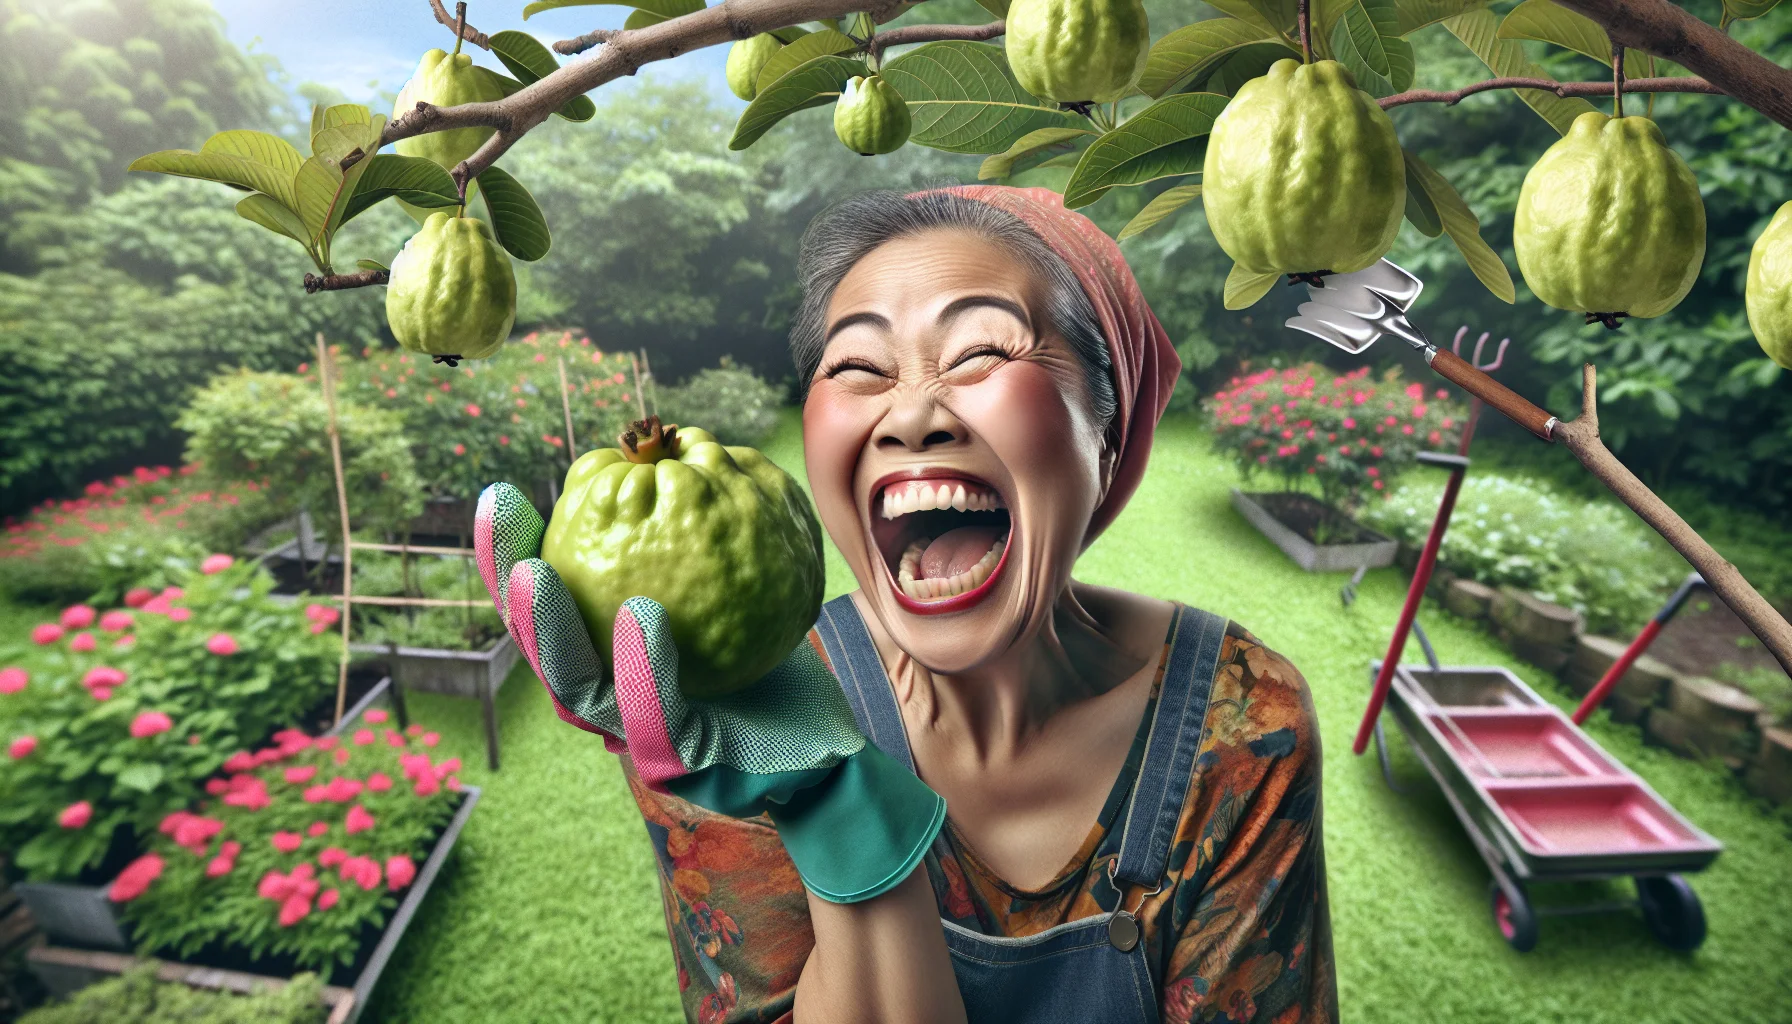 Create a whimsical scenario that showcases how to eat a guava fruit in a lively garden. The scene includes a laughing Asian woman with gardening gloves on, enthusiastically biting into a ripe, juicy guava straight off the tree. The expressions and gestures of the woman should be exaggerated for a comical effect. The garden around her is lush and vibrant, filled with various fruit trees and blooming flowers, signaling the joy and productivity of gardening. This image should feel inviting and entertaining, making gardening and fruit consumption seem like a fun and fulfilling activity.